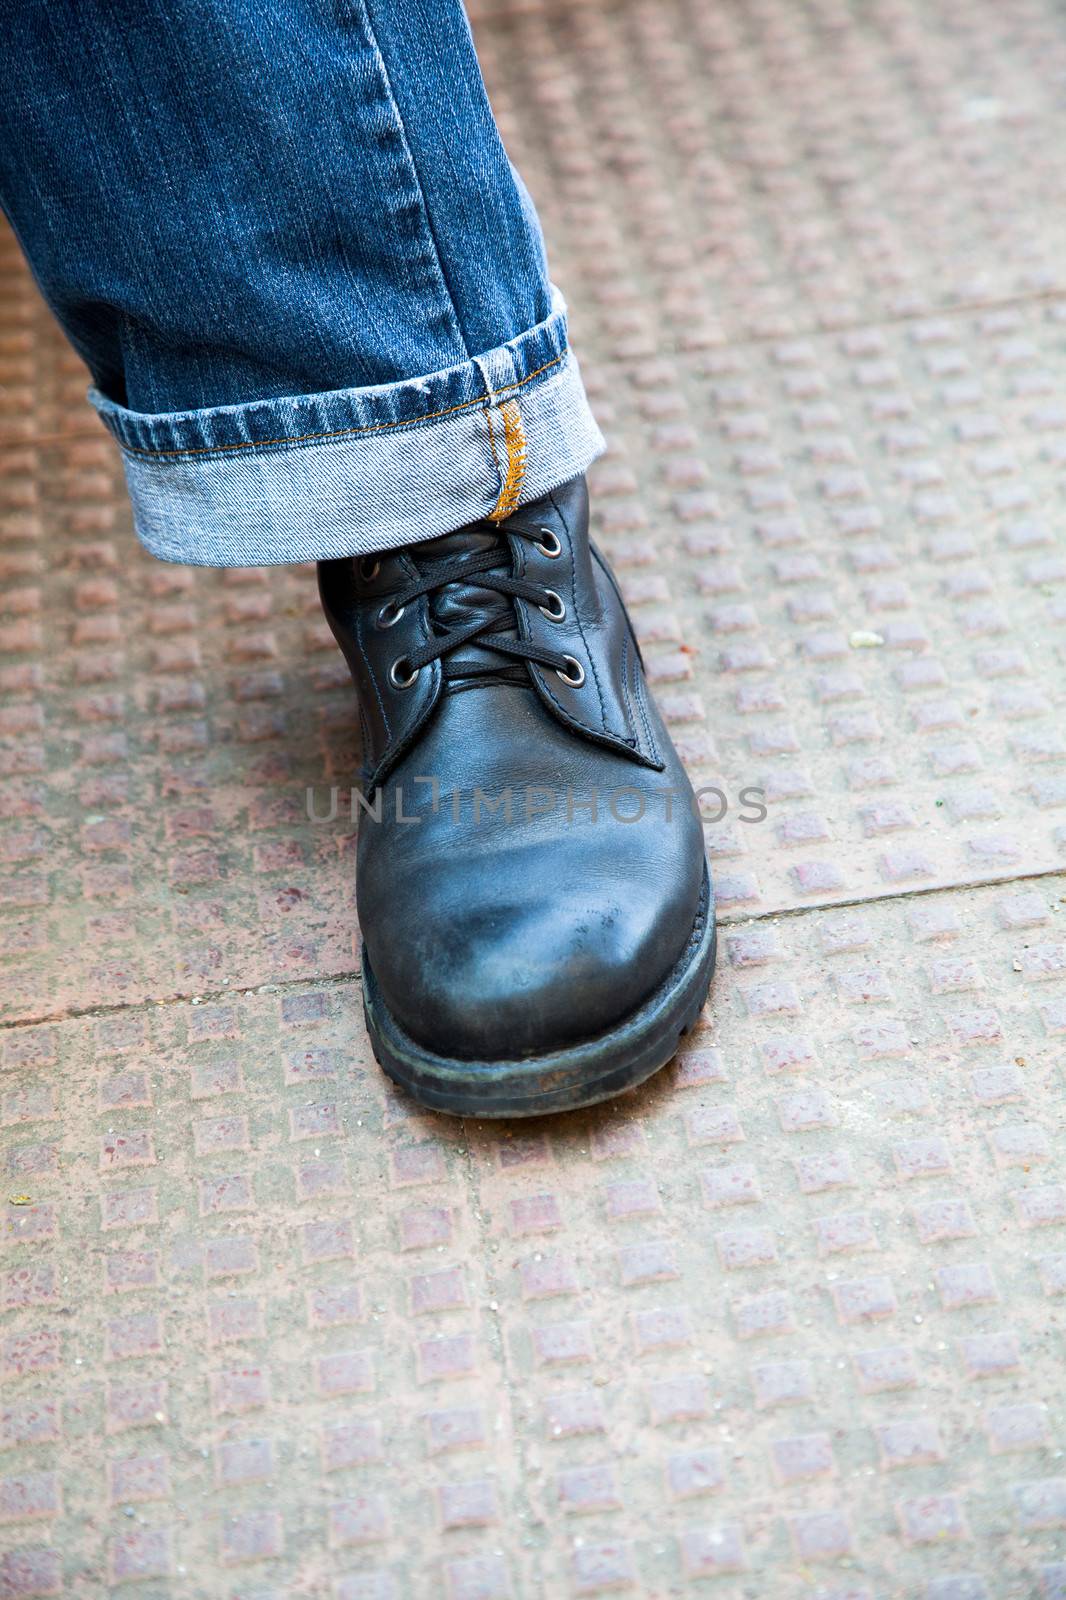 Angled laced up leather boot denim jeans by arfabita